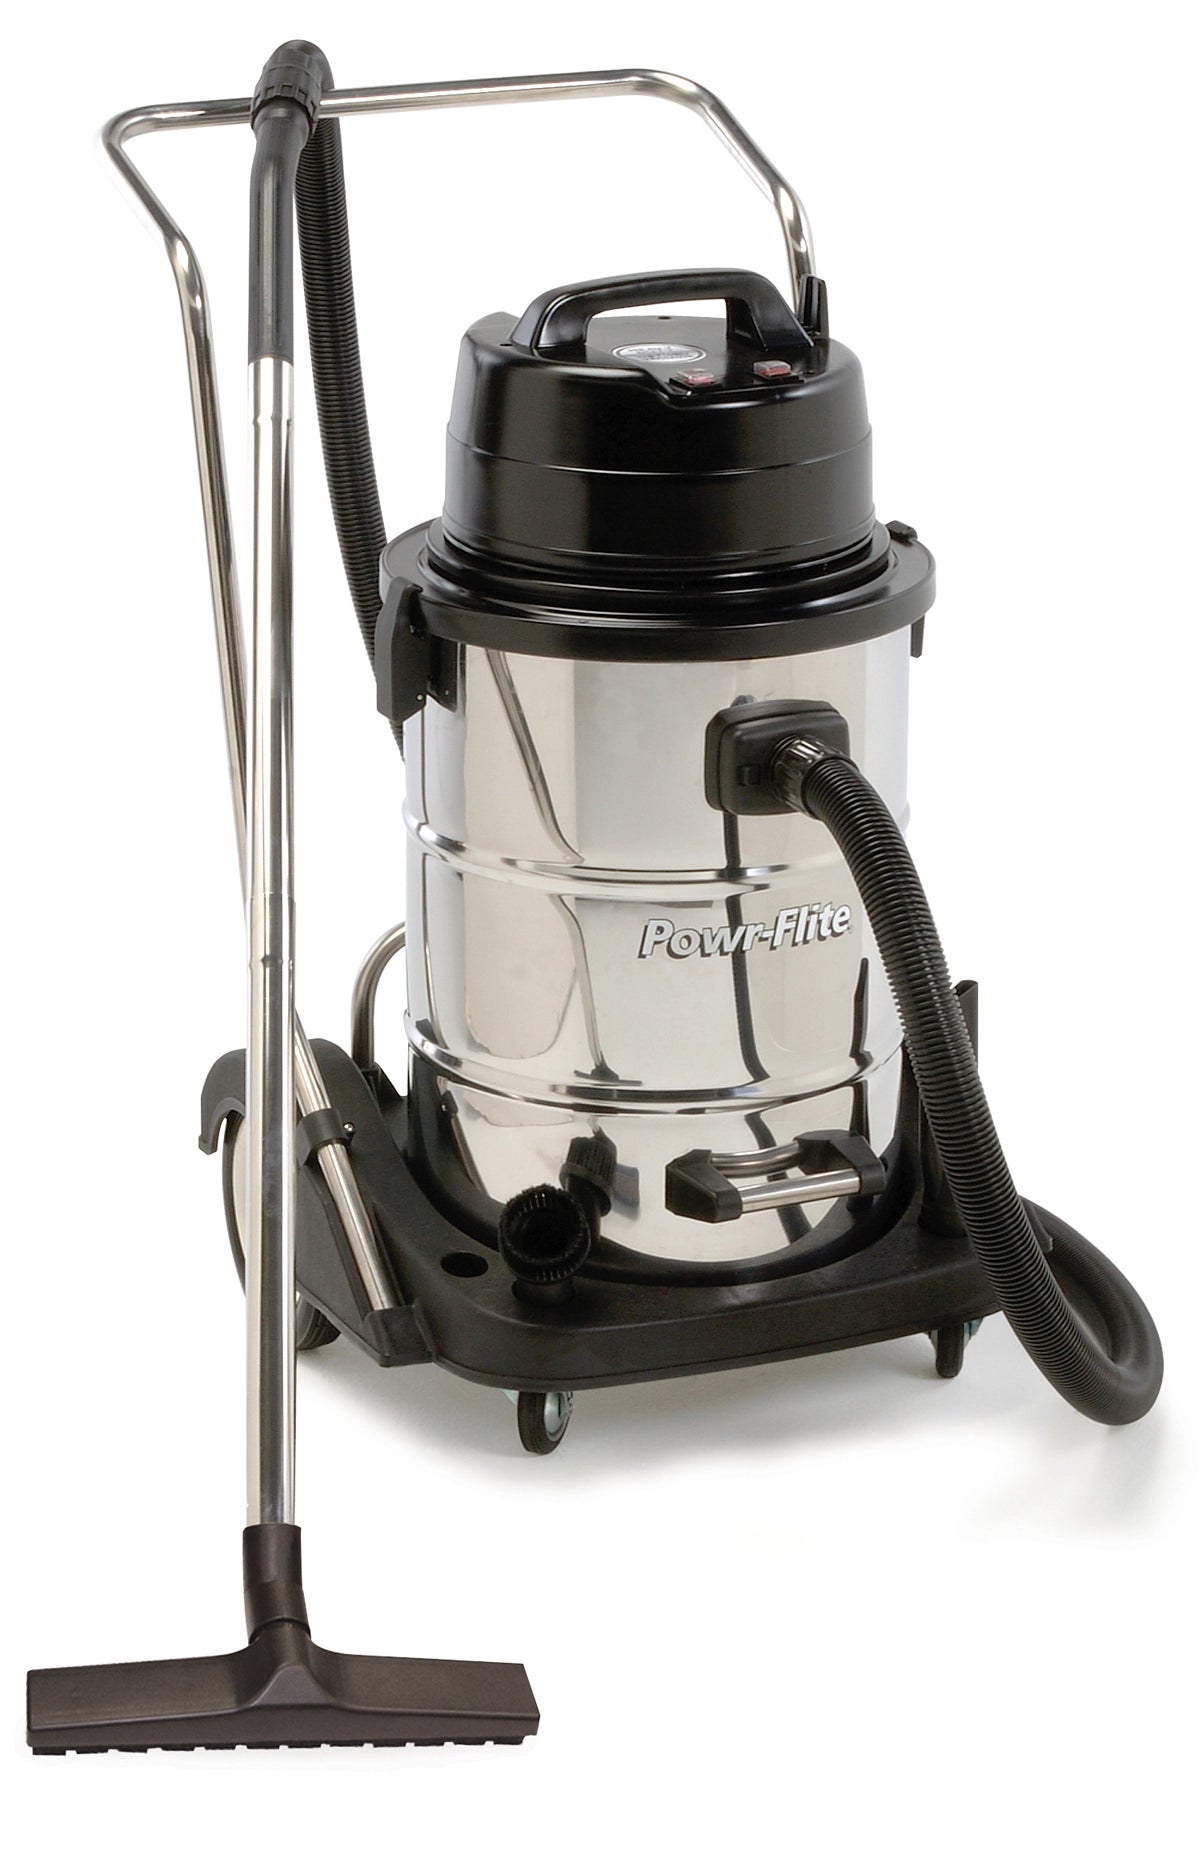 Powr-Flite Pf57 Wet Dry Vacuum 20 Gallon Dual Motor with Stainless Steel Tank